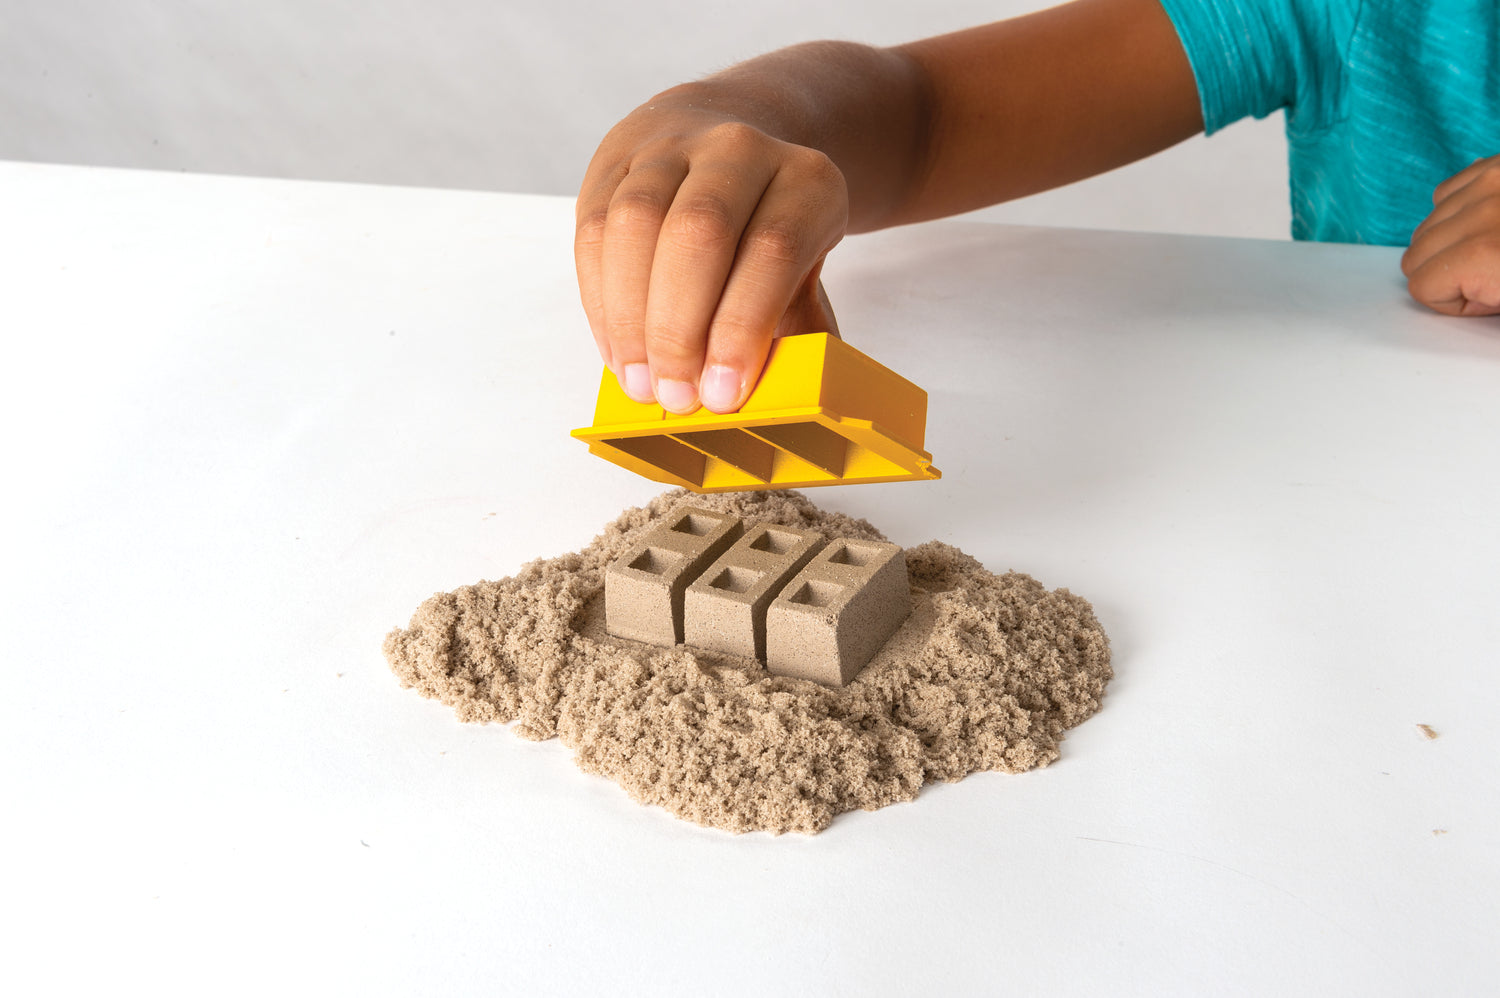 Kinetic Sand Dig & Demolish Truck Playset (with 1 pound of sand)